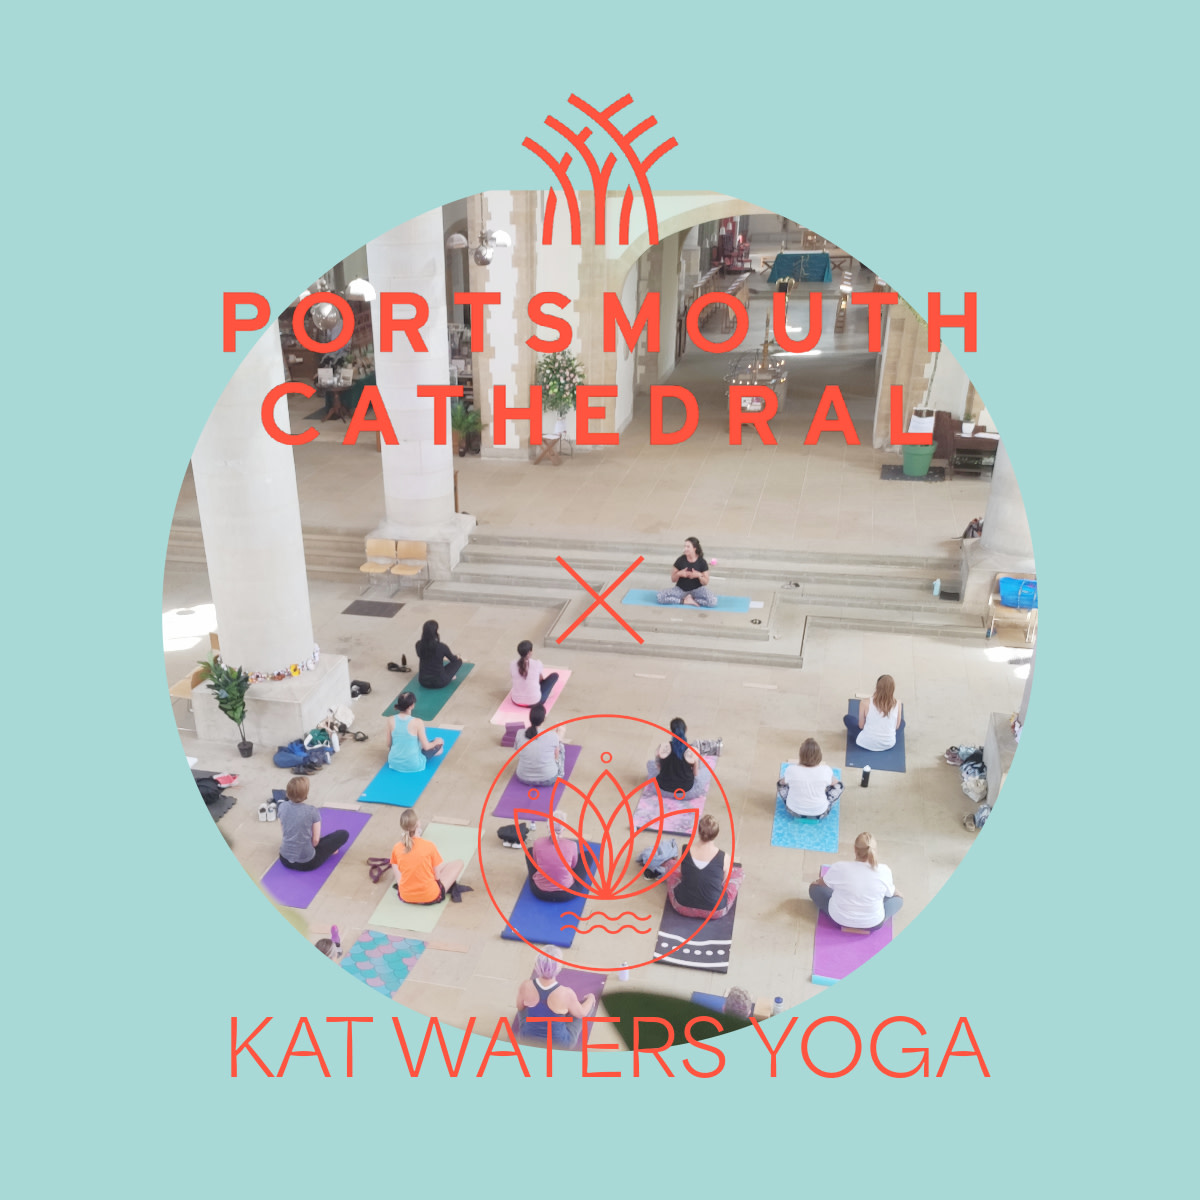 Looking for some tranquility in a unique setting? Join us at Portsmouth Cathedral for a rejuvenating yoga session led by Kat Waters. 🧘‍♀️ #yoga #wellness #PortsmouthCathedral See dates and book 👉 portsmouthcathedral.org.uk/portsmouth-cat…